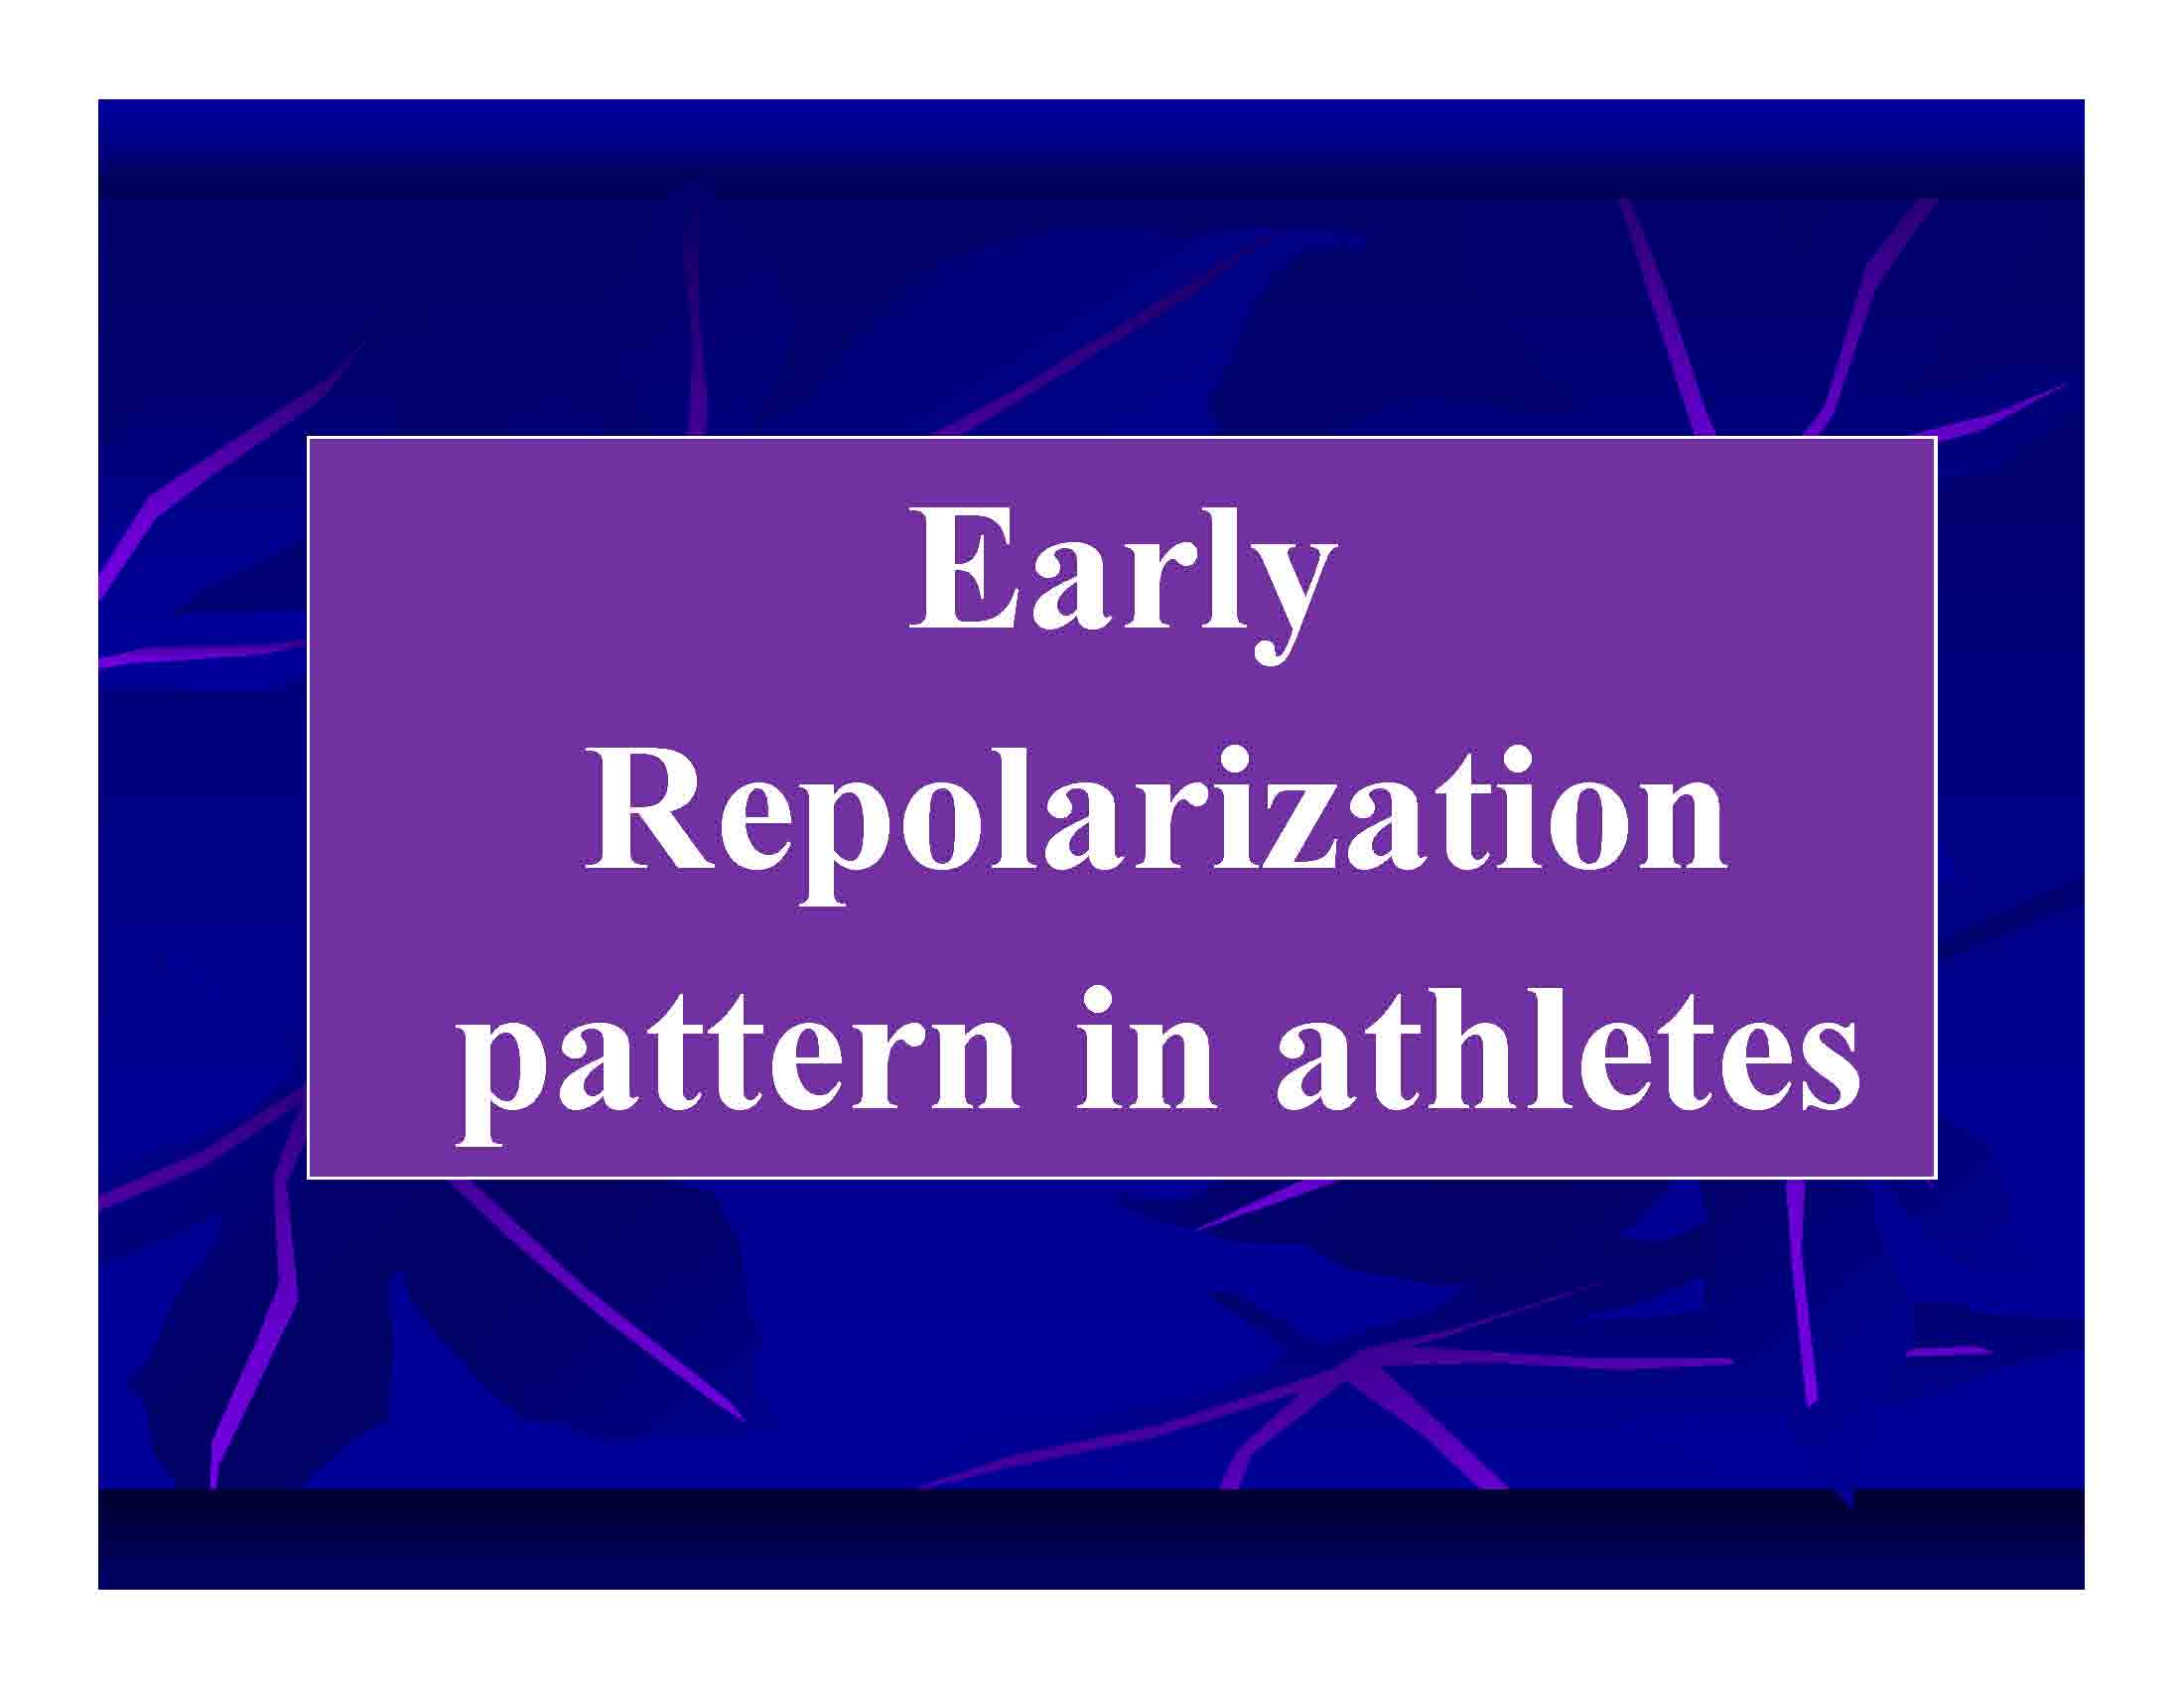 Early Repolarization pattern in athletes